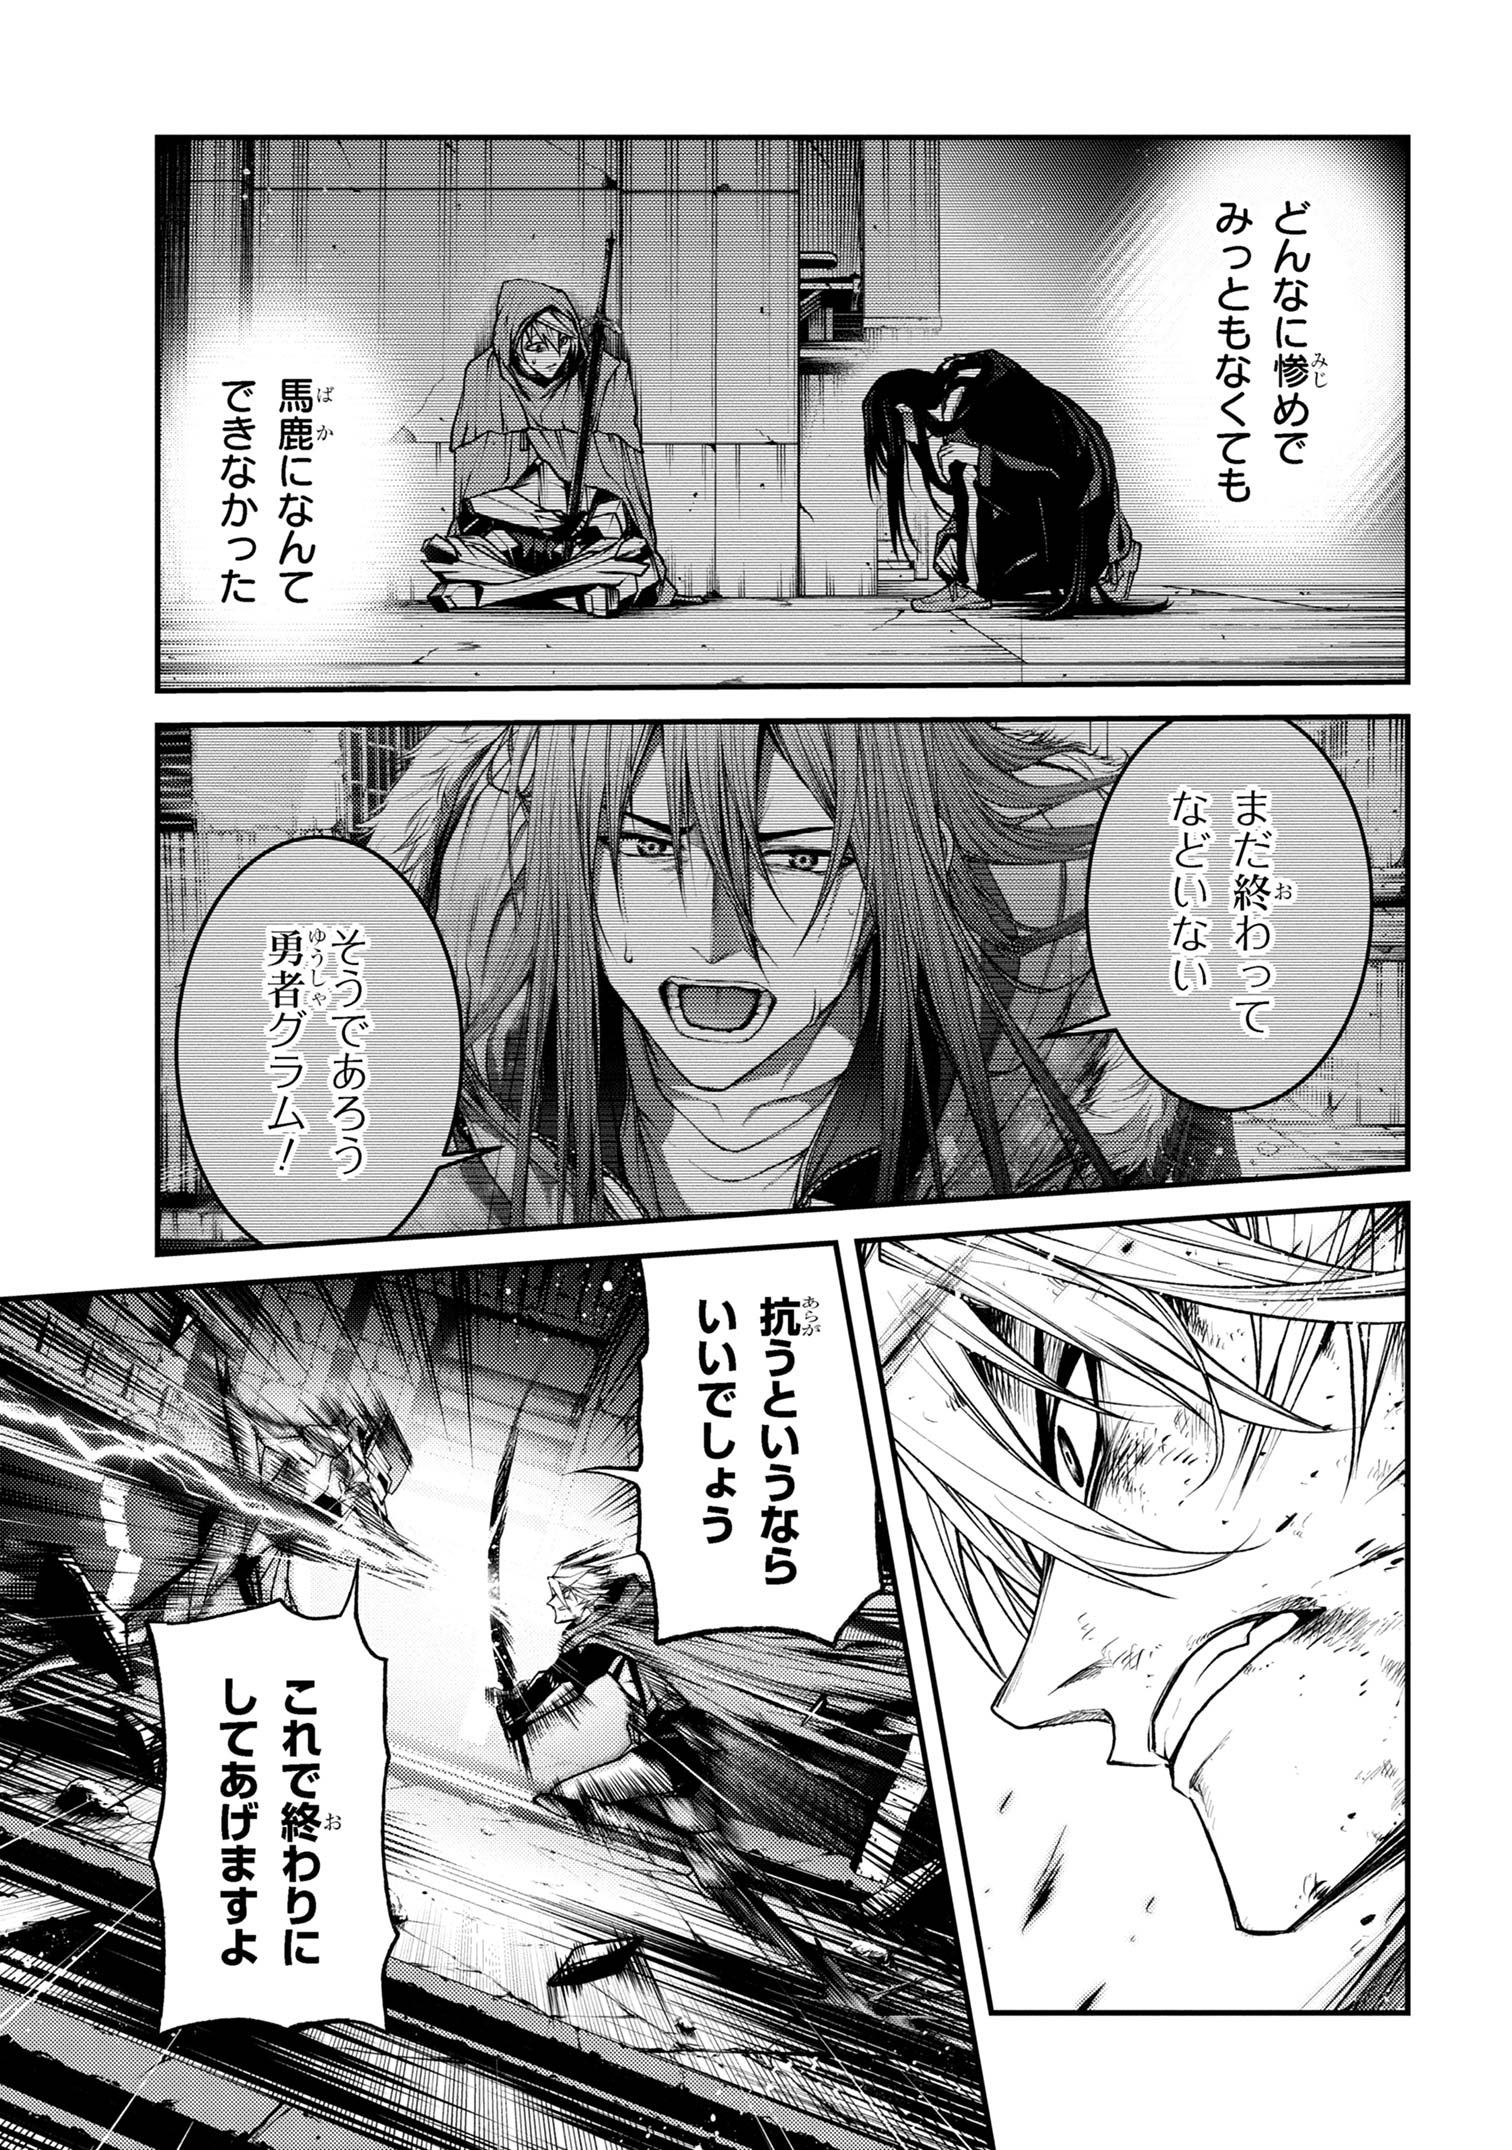 Maou 2099 - Chapter 12.2 - Page 3